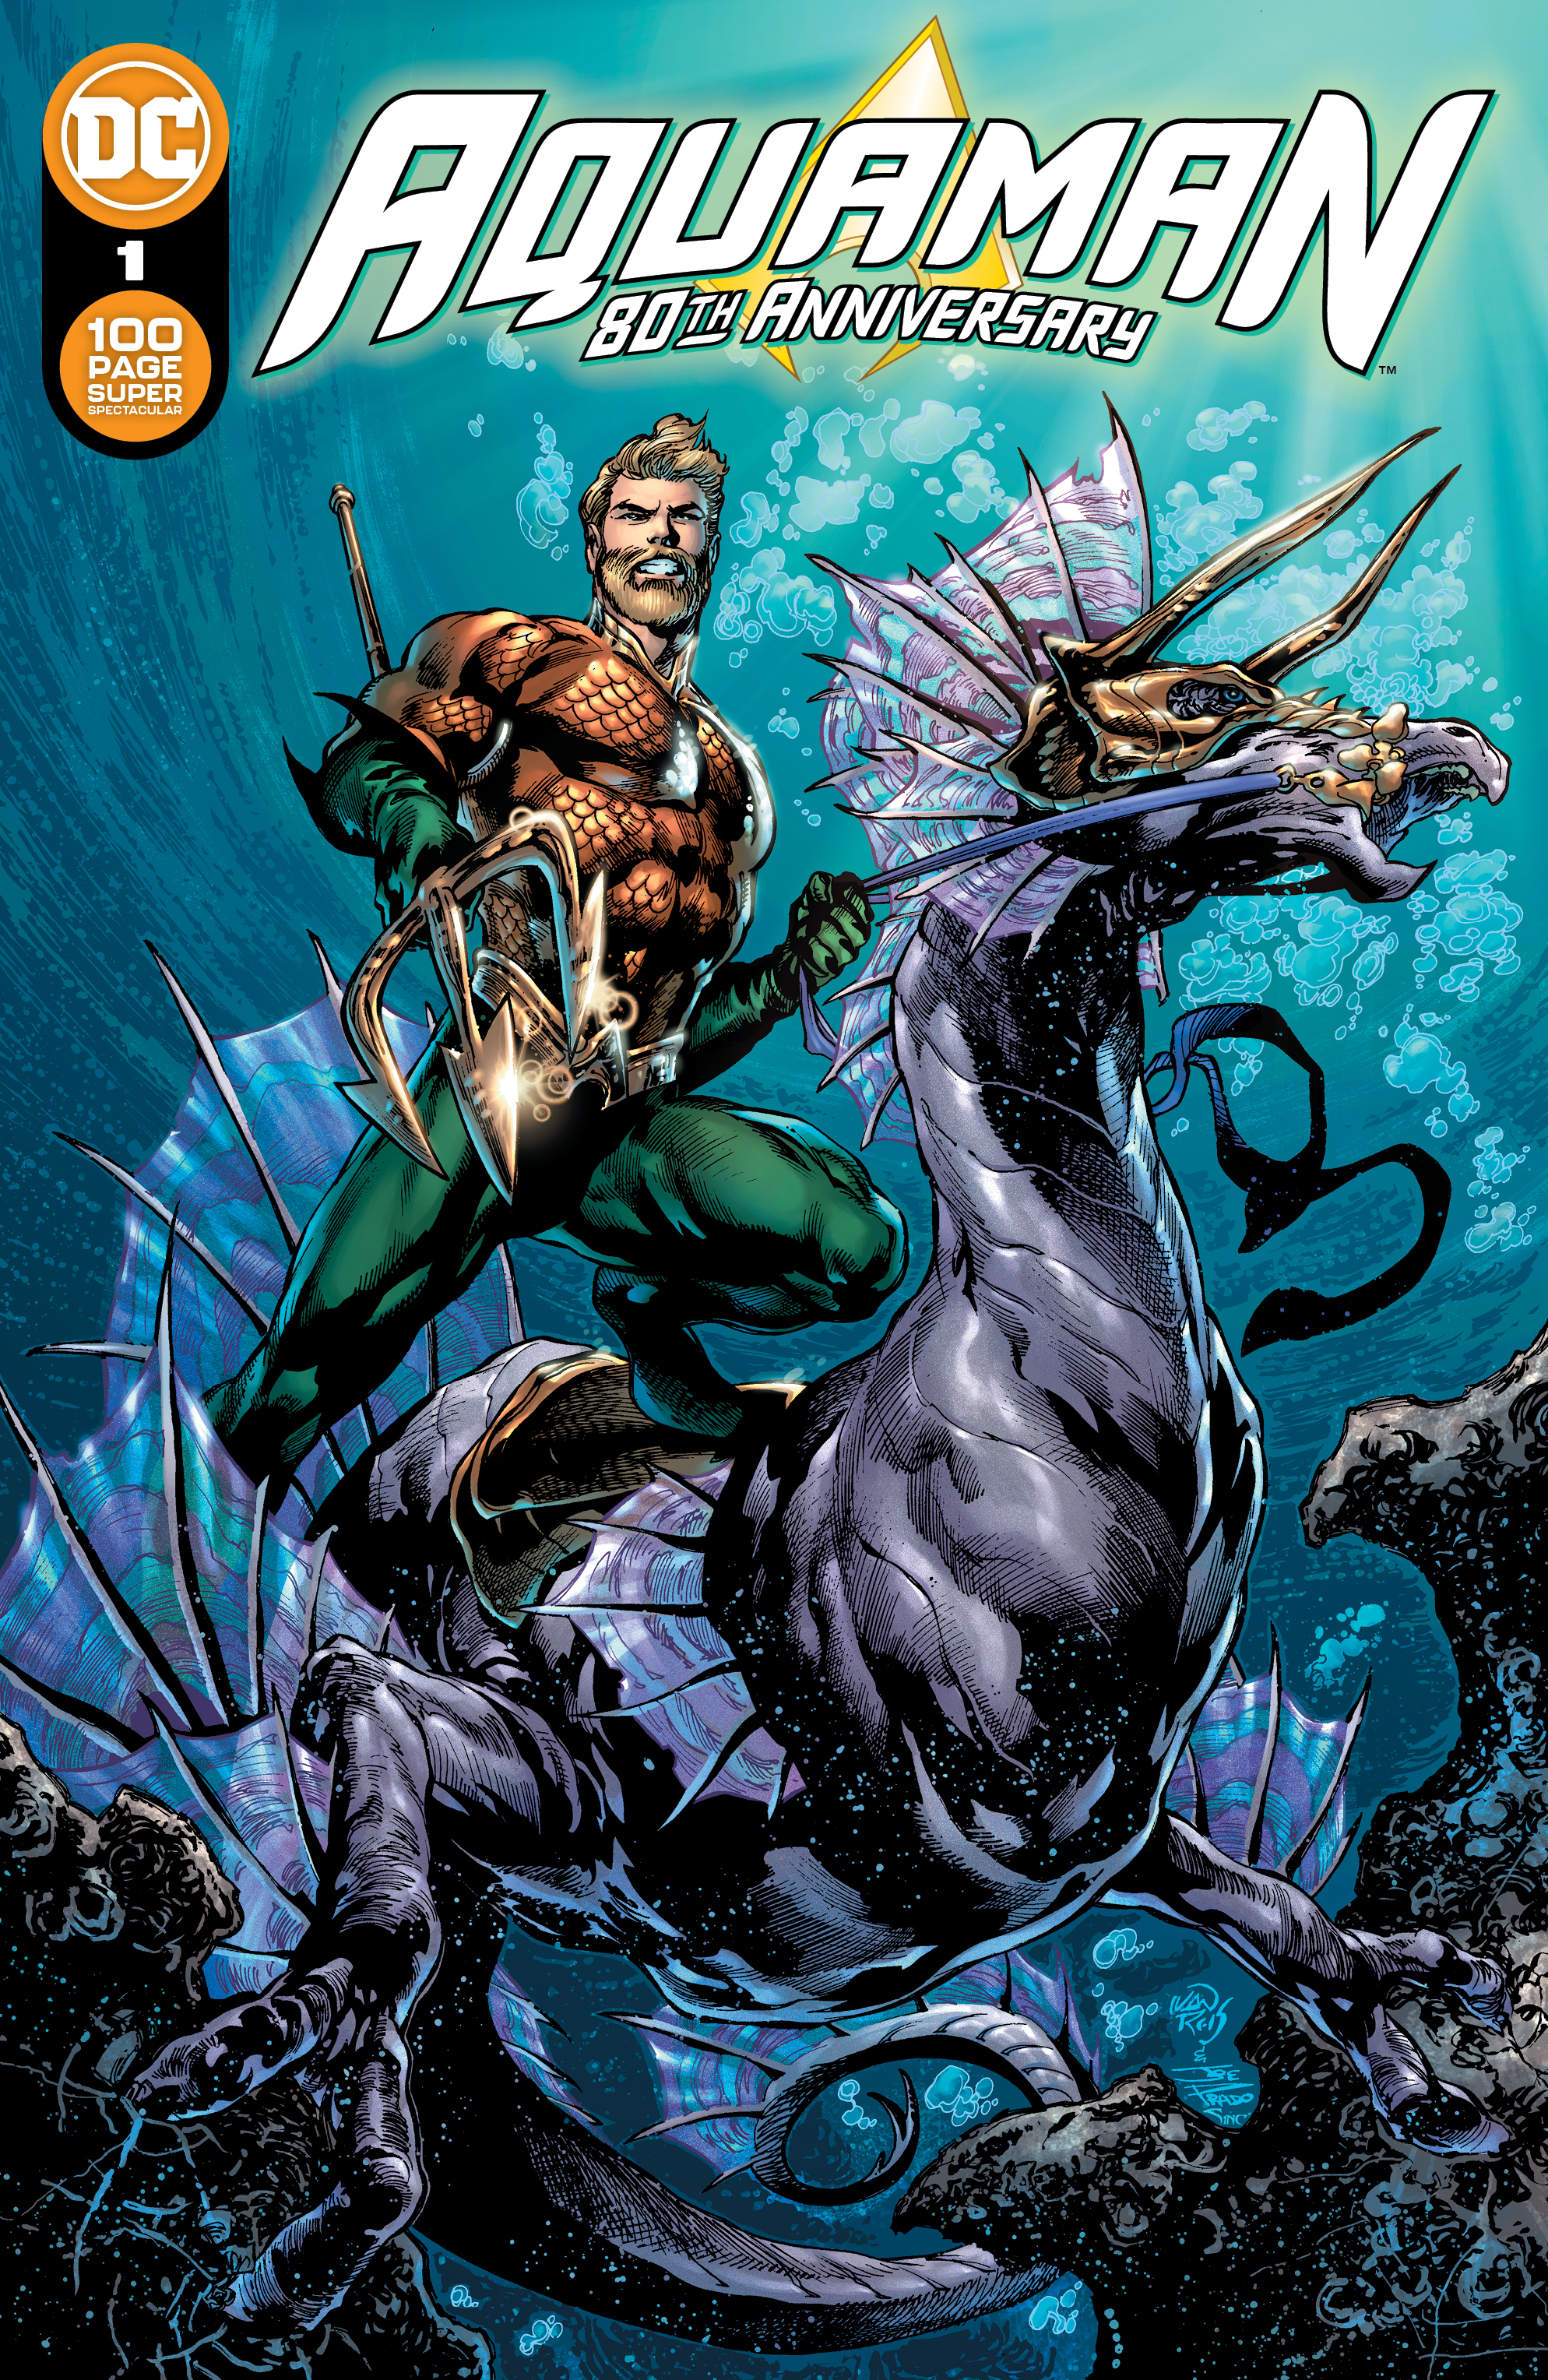 Aquaman 80th Anniversary 100-Page Super Spectacular #1 (One Shot) Cover A Reis